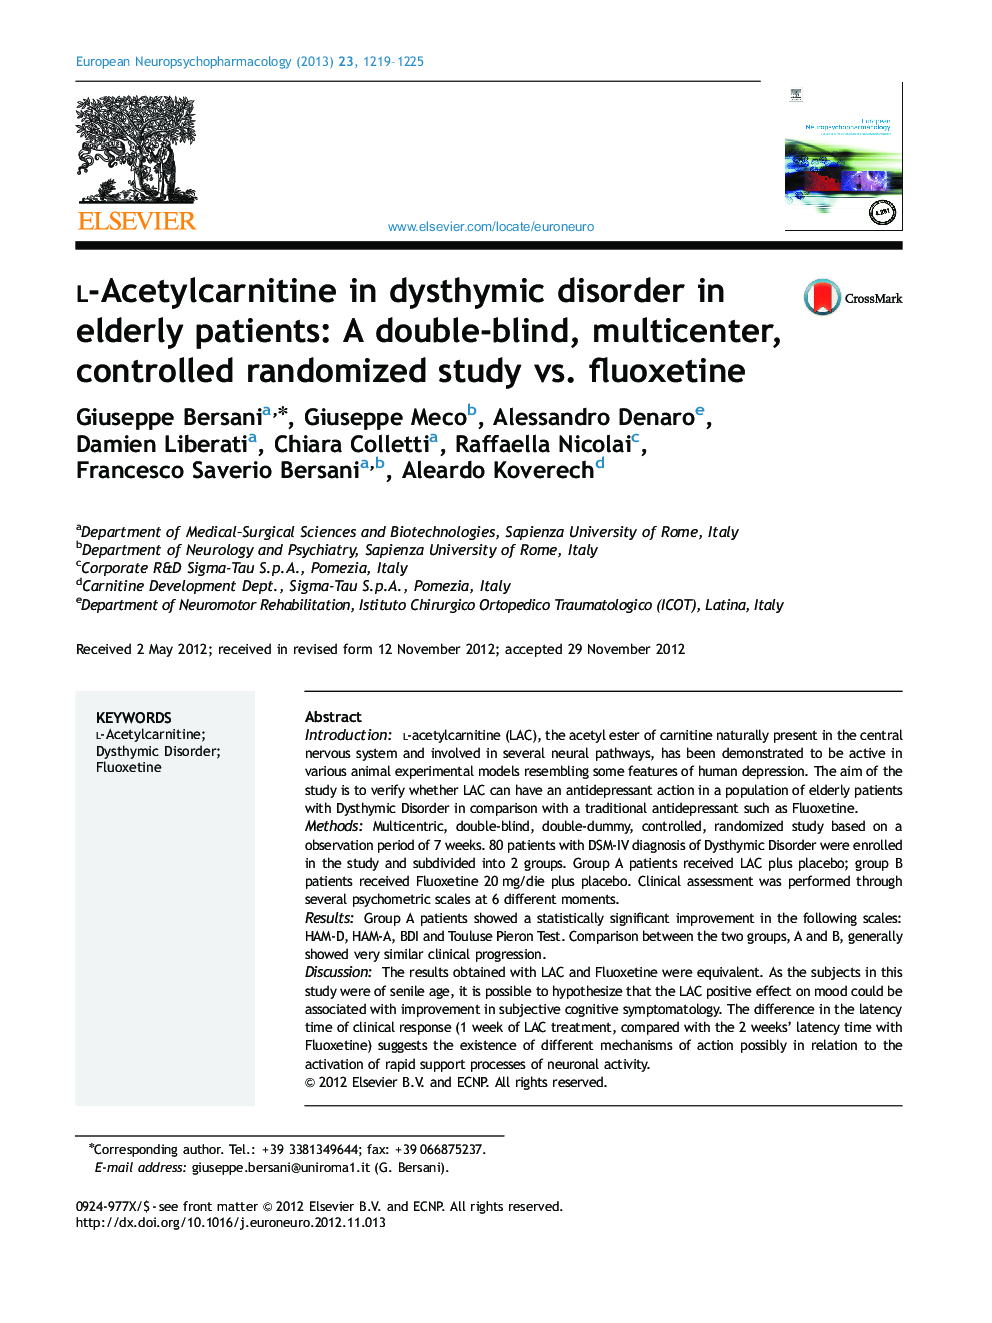 l-Acetylcarnitine in dysthymic disorder in elderly patients: A double-blind, multicenter, controlled randomized study vs. fluoxetine